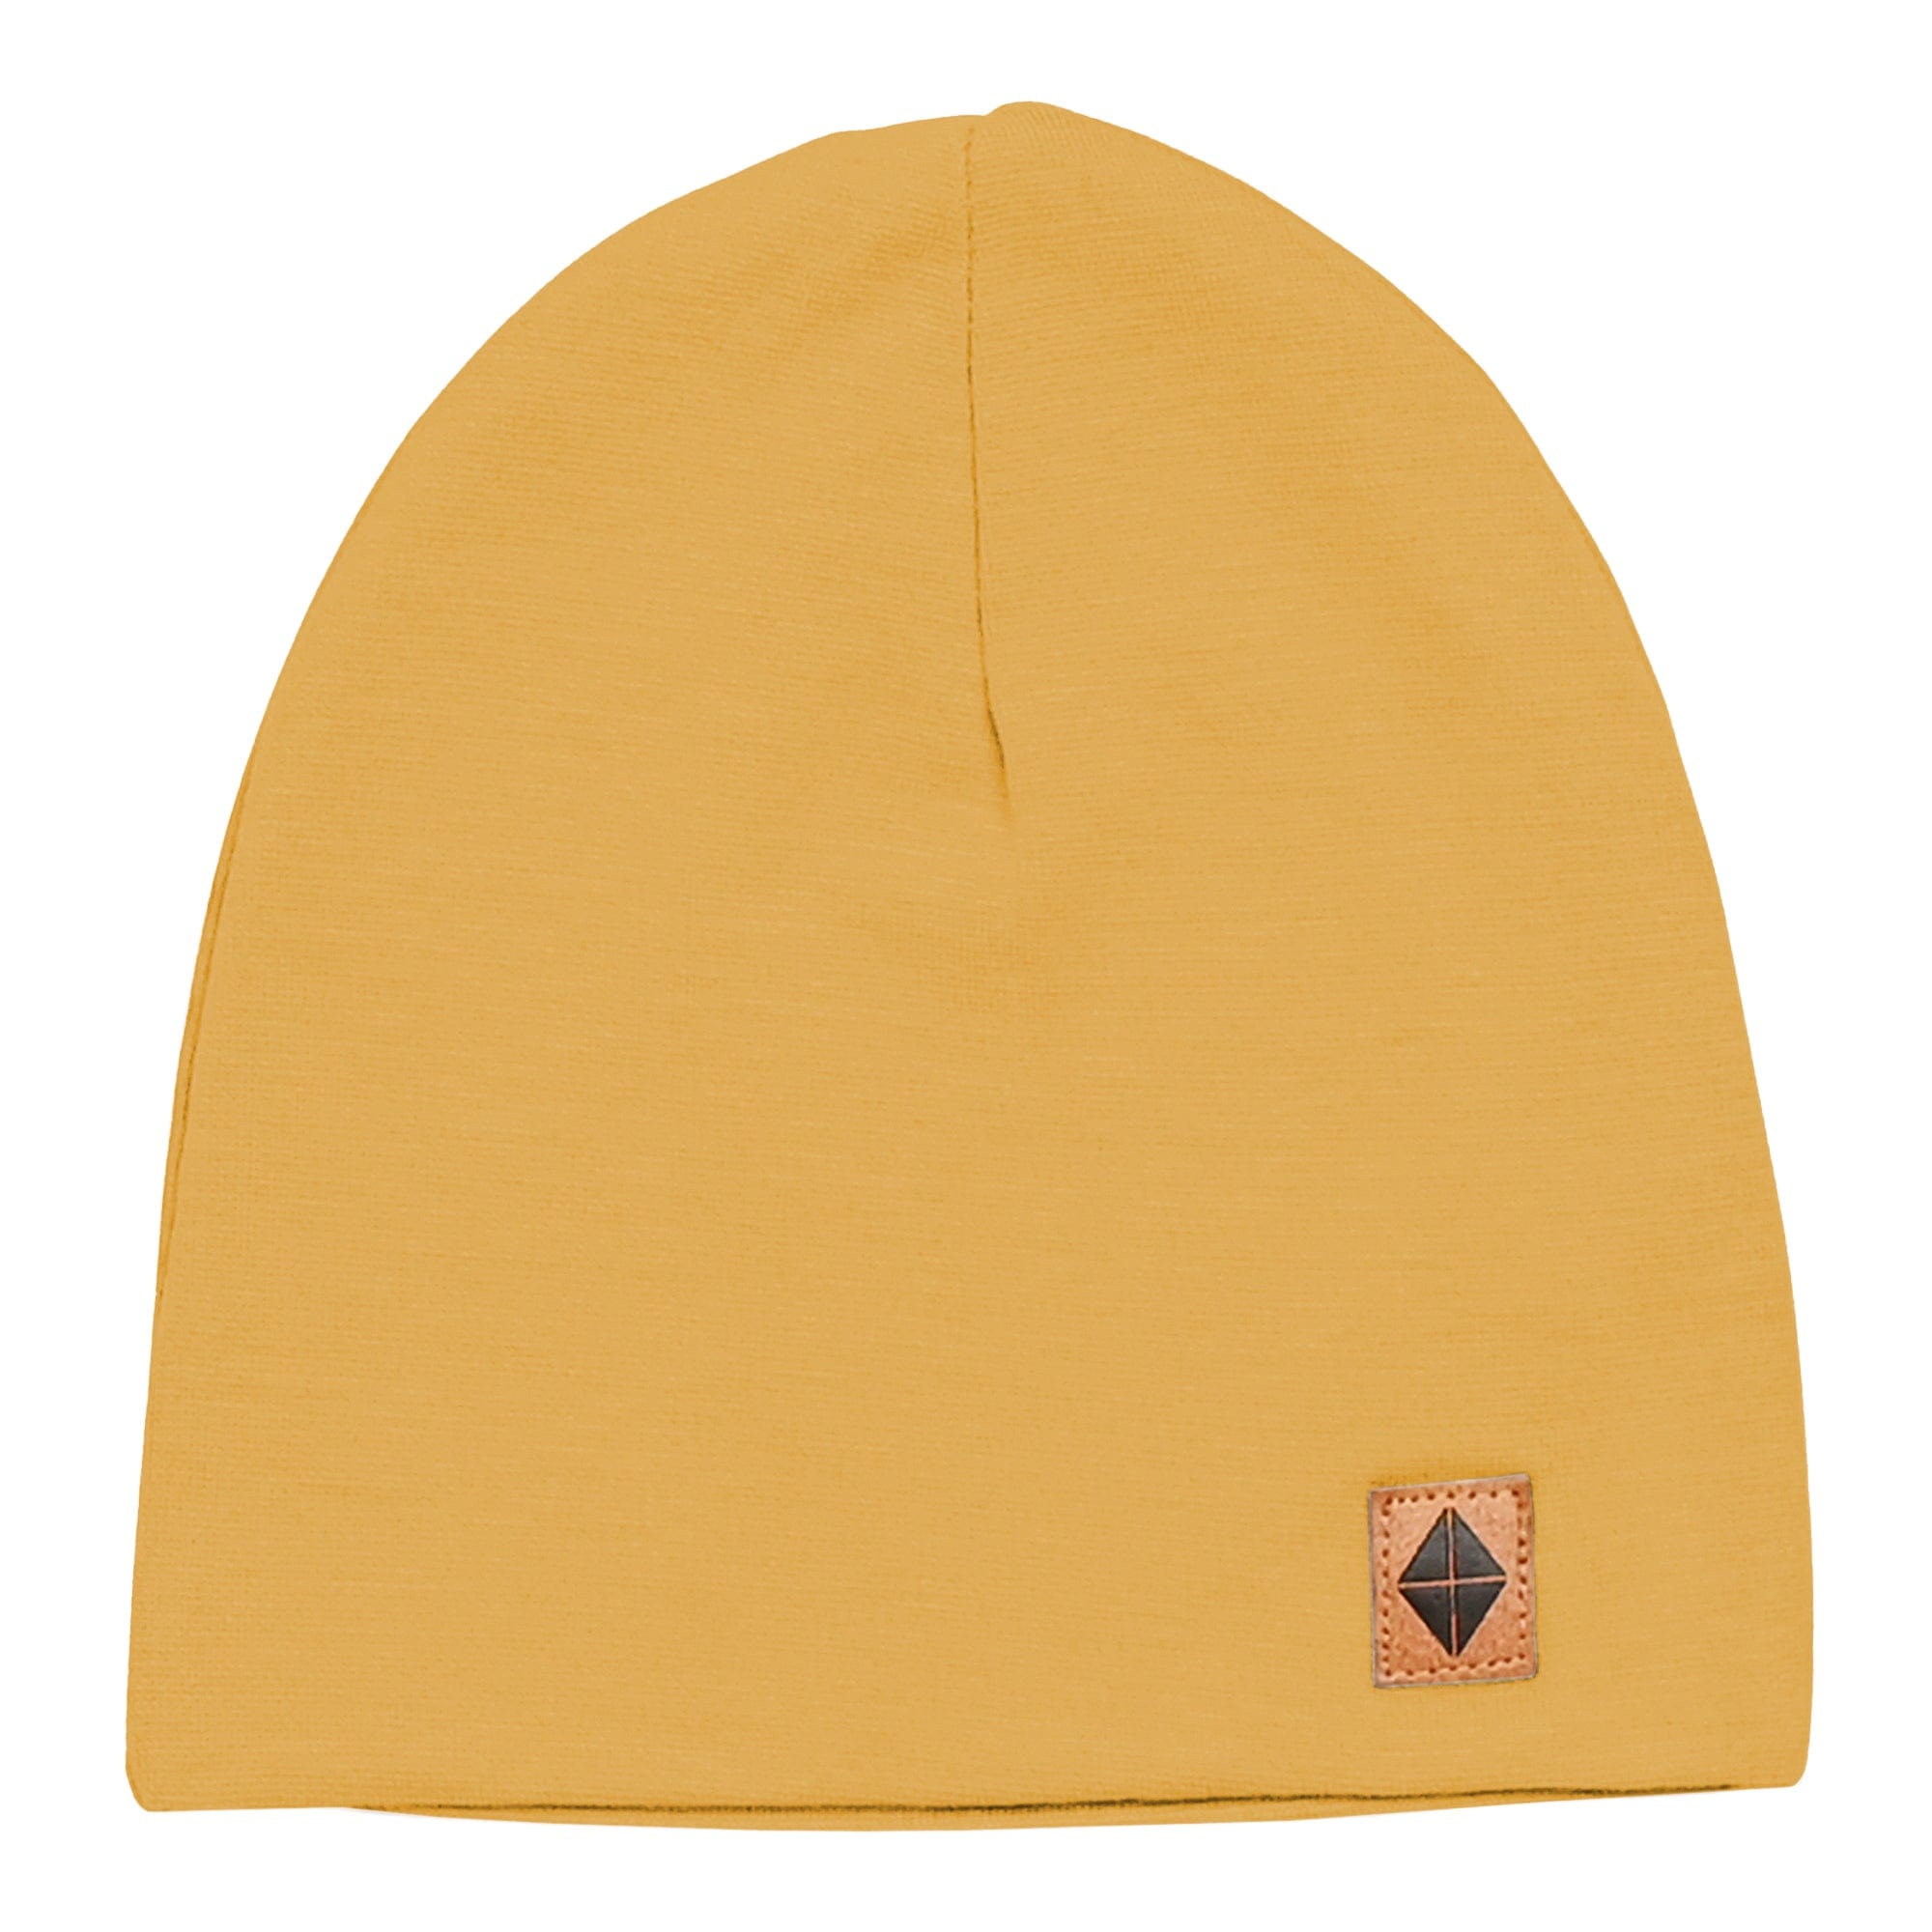 Kyte BABY Adult Beanie Bamboo Jersey Adult Beanie in Marigold